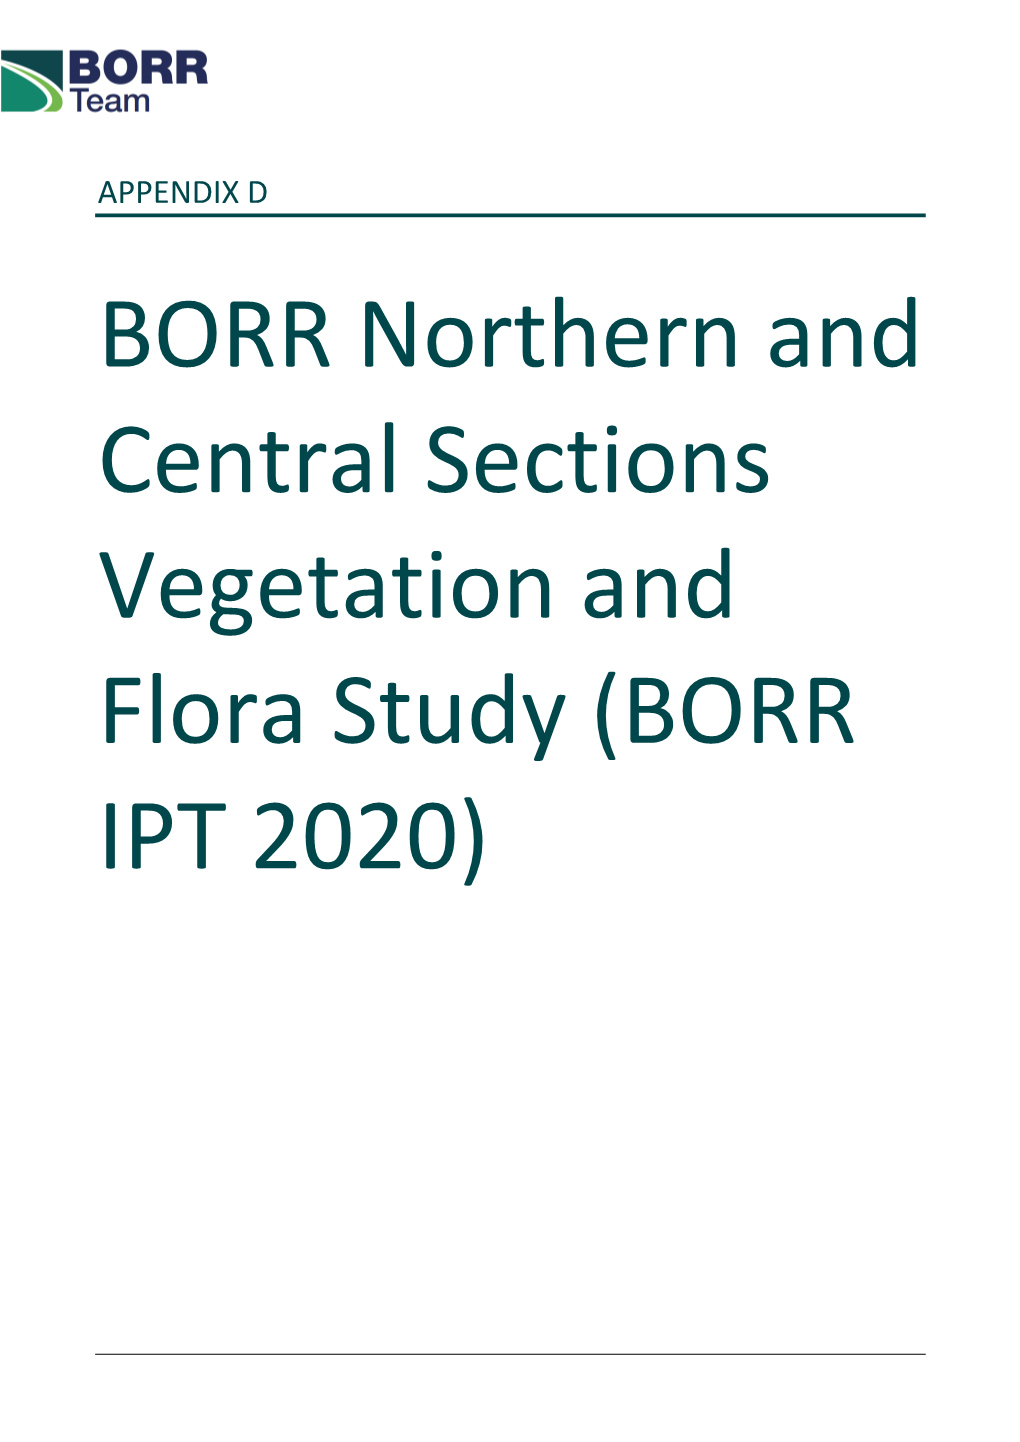 BORR Northern and Central Sections Vegetation and Flora Study (BORR IPT 2020)